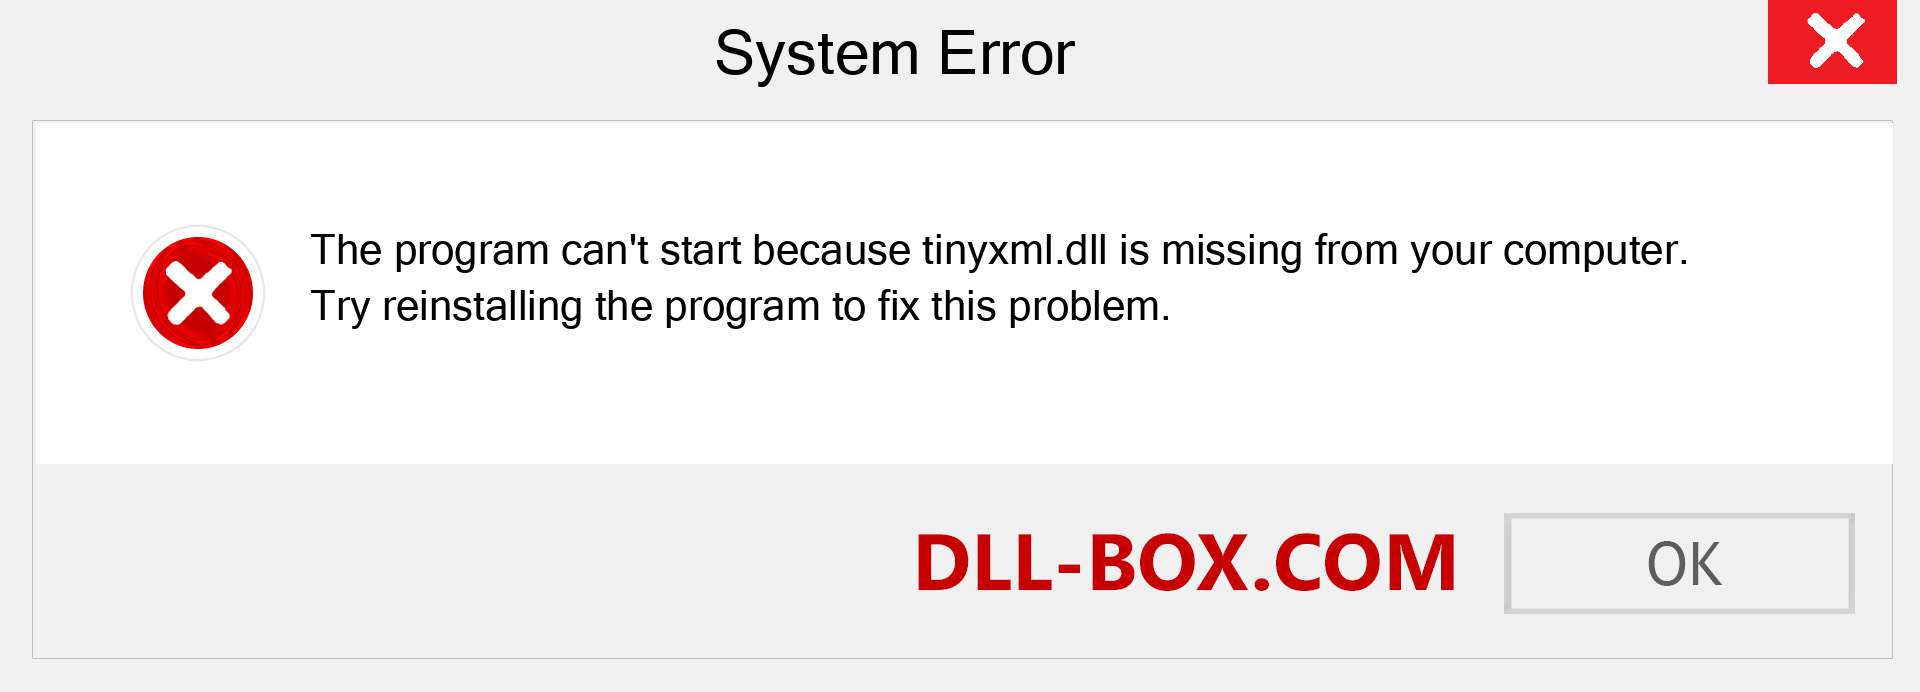  tinyxml.dll file is missing?. Download for Windows 7, 8, 10 - Fix  tinyxml dll Missing Error on Windows, photos, images